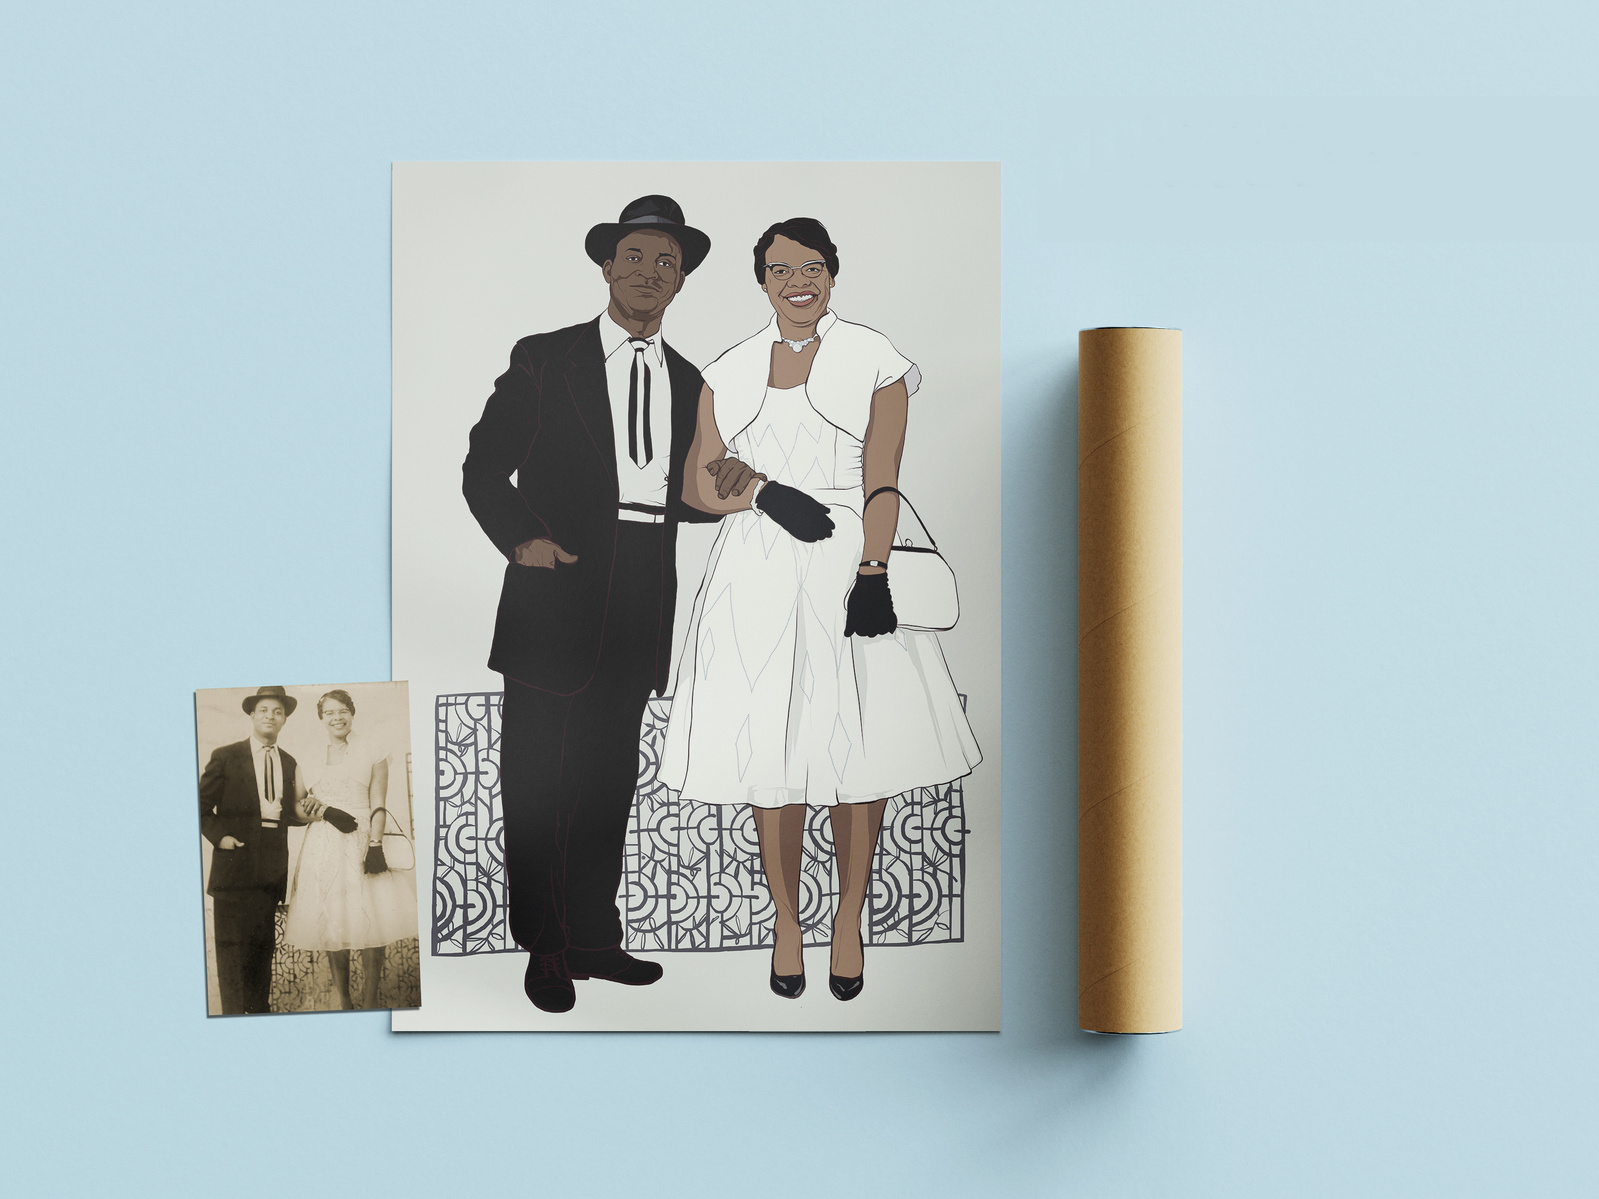 This illustration is a reinterpretation of an old black and white wedding photograph.   The couple have dark skin and are wearing traditional wedding attire with trilby hat.  The artwork has muted tones reflecting the original sepia image.